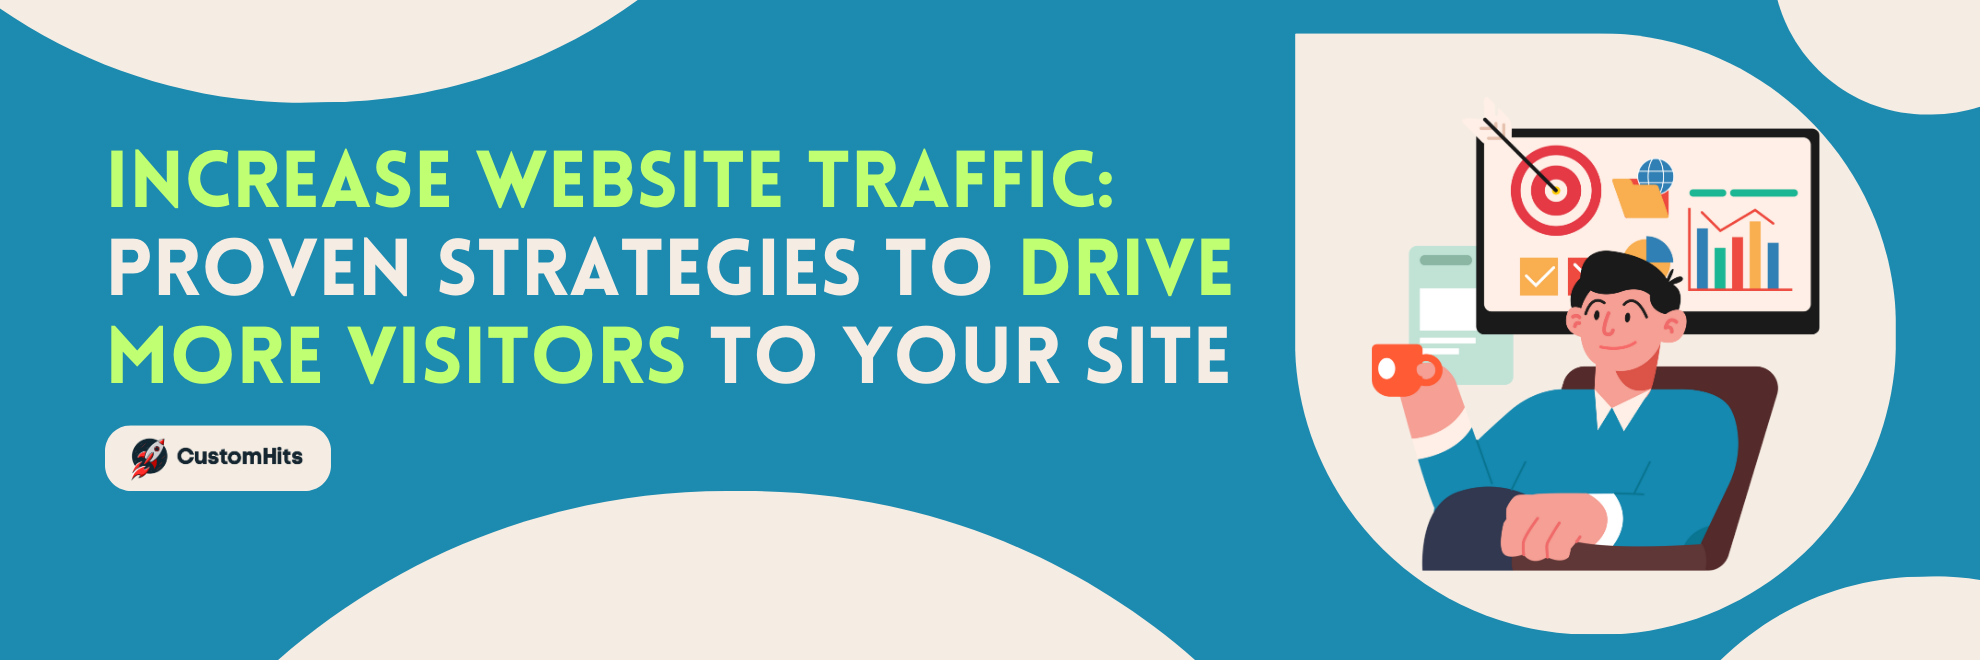 Increase Website Traffic: Proven Strategies to Drive More Visitors to Your Site